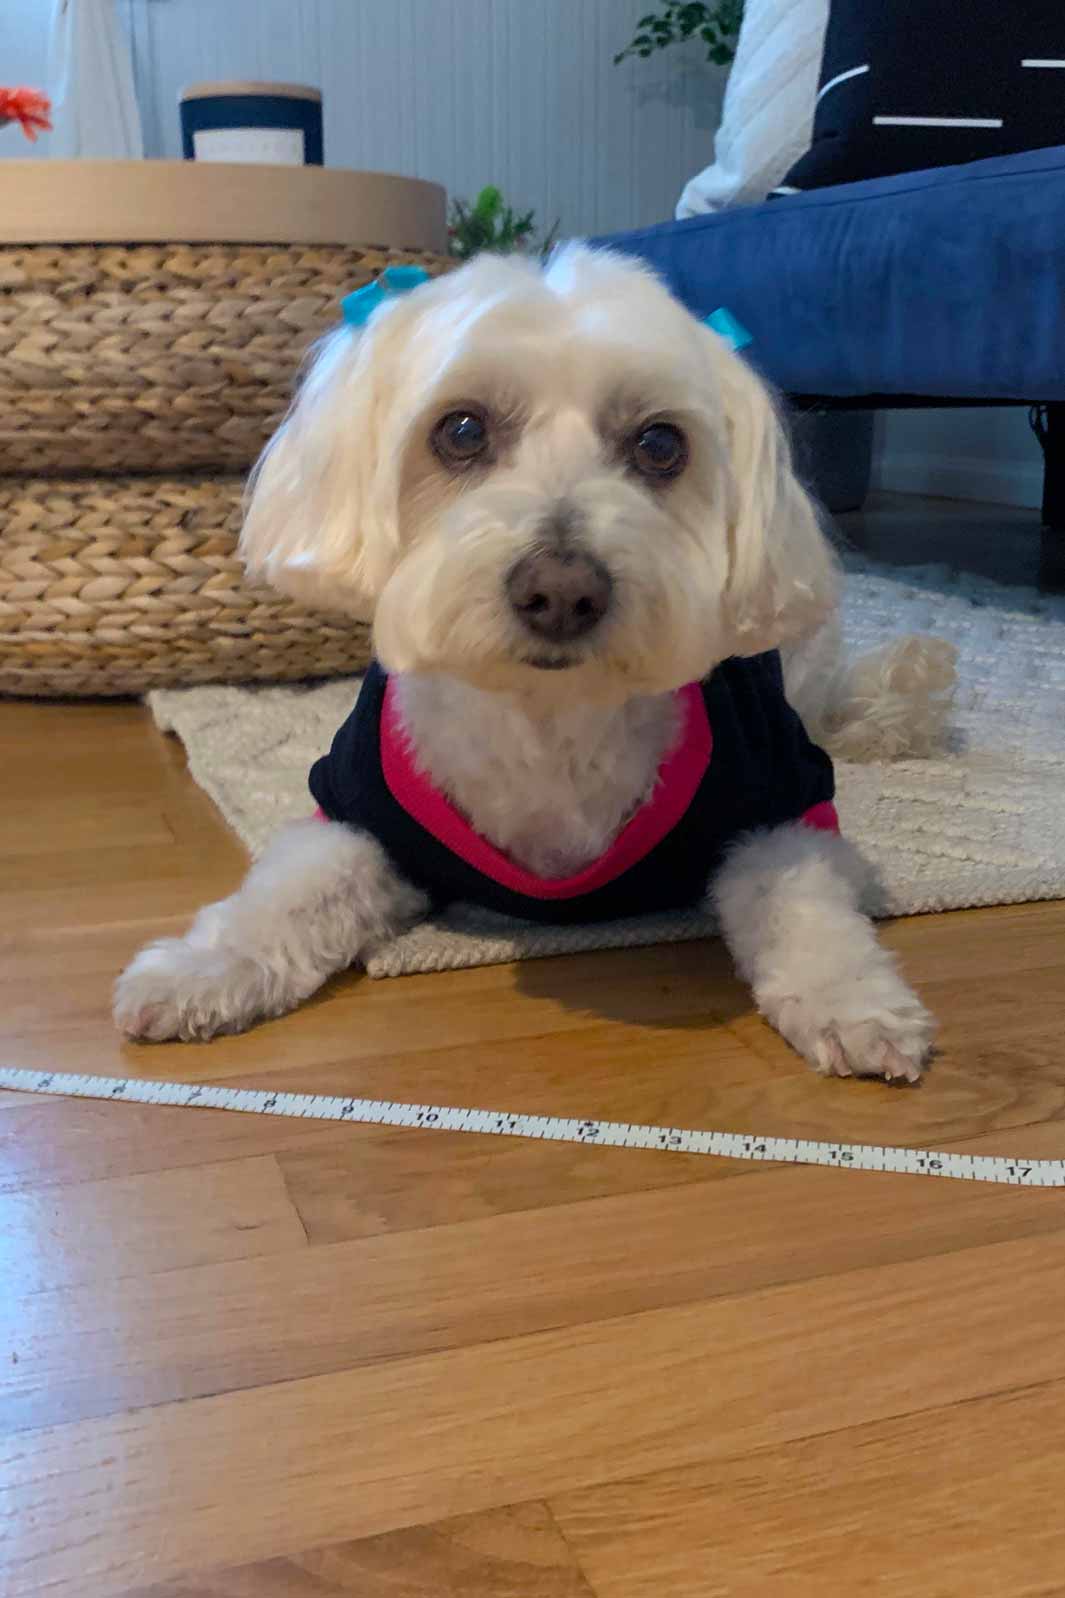 Willow, Bichon Frise, Maltese and Havanese mix, laying down wearing her "Eat, Sleep, Play, Poop" Dog Sweater.